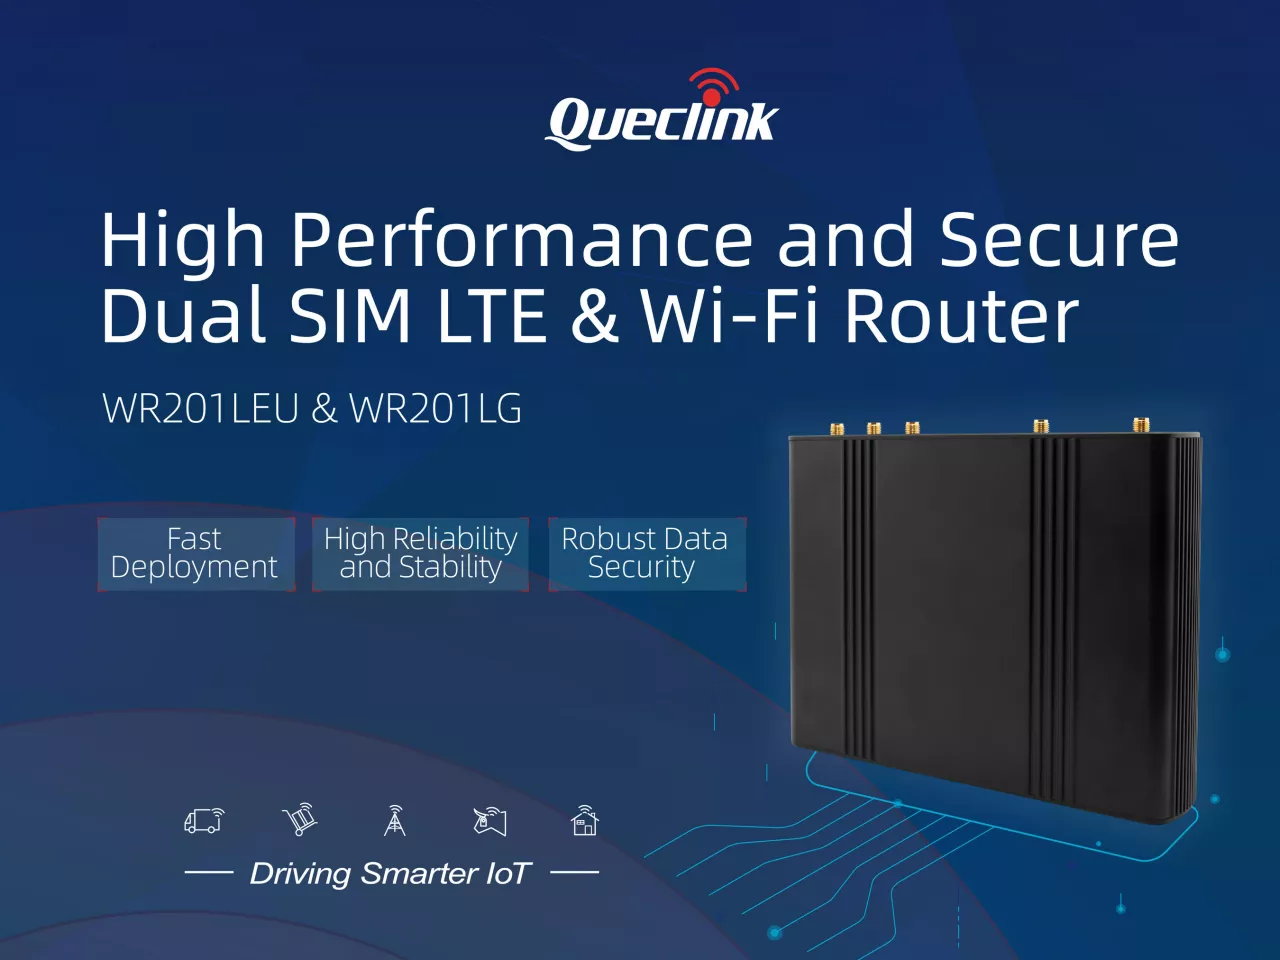 (Queclink’s Industrial Routers WR201LG、WR201LEU) img#1